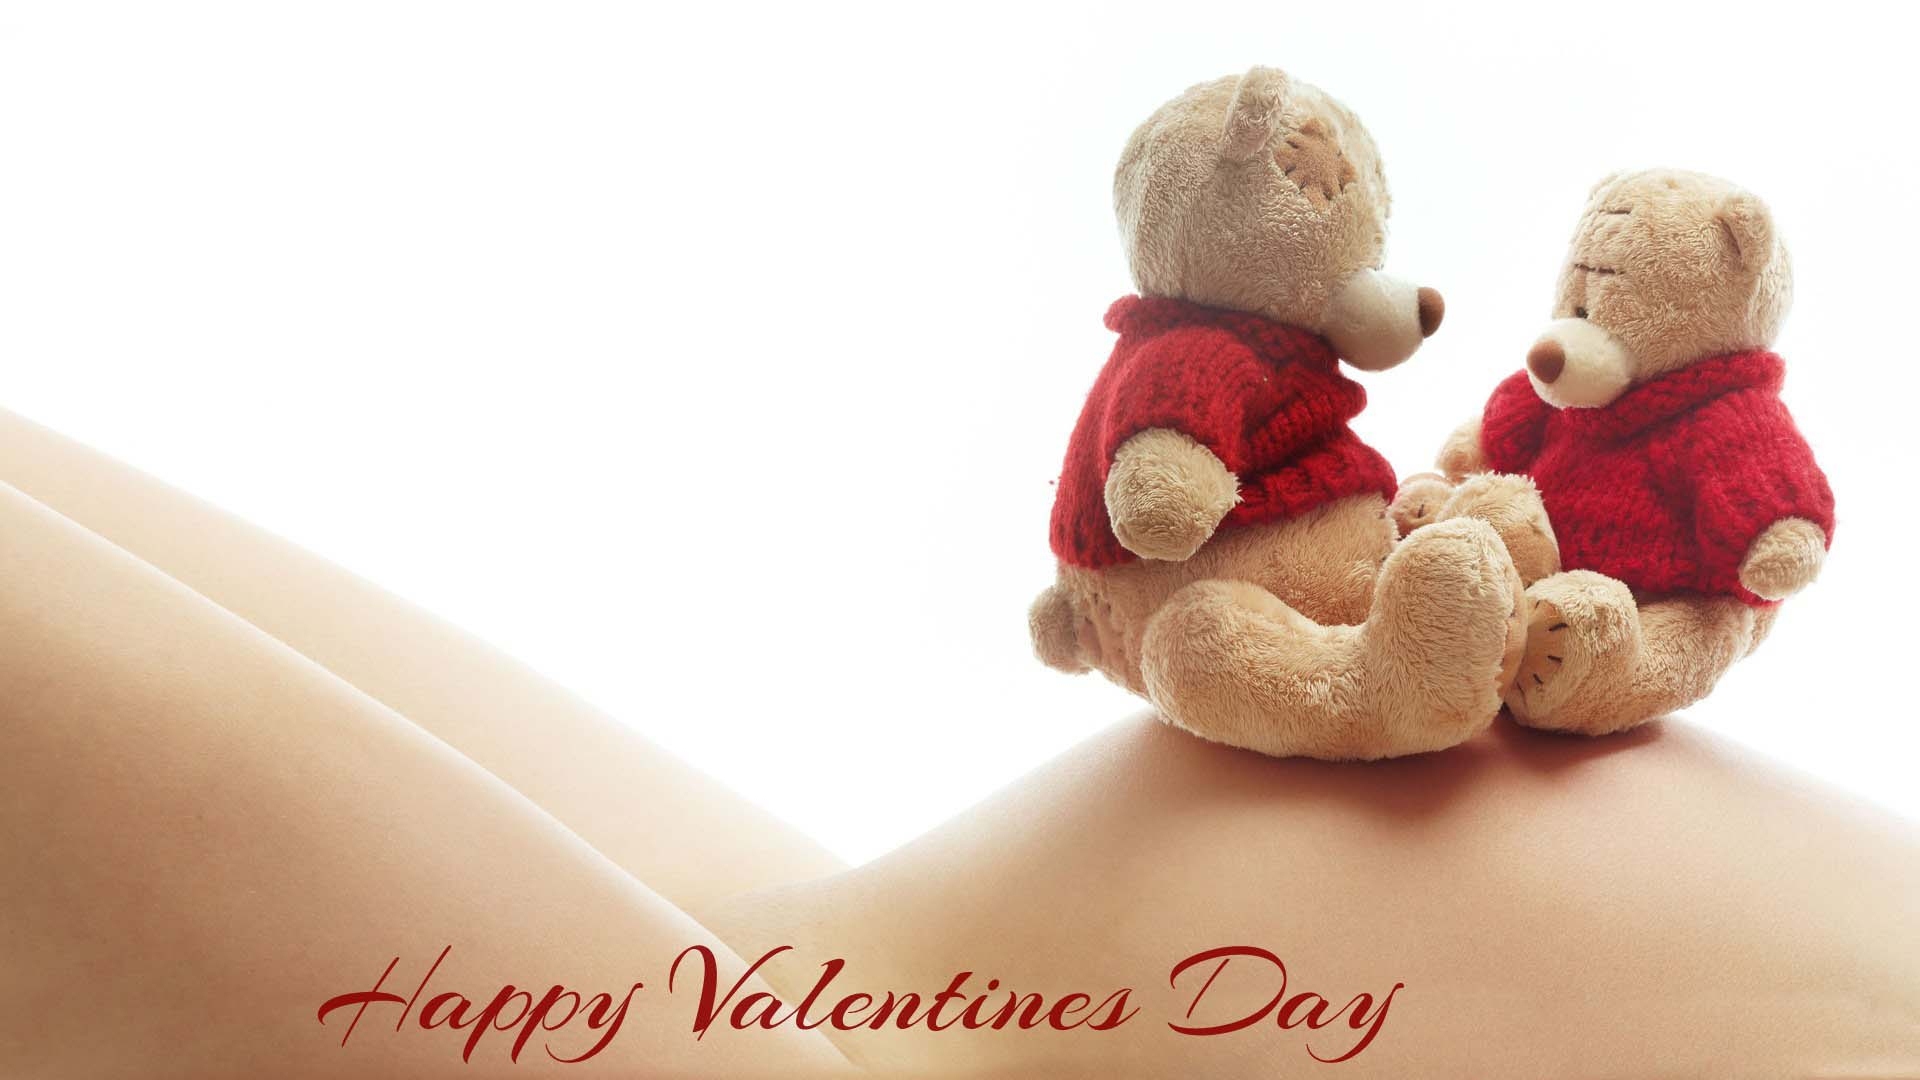 Loverly Teddy Day Status & Messages for Whatsapp & Facebook 